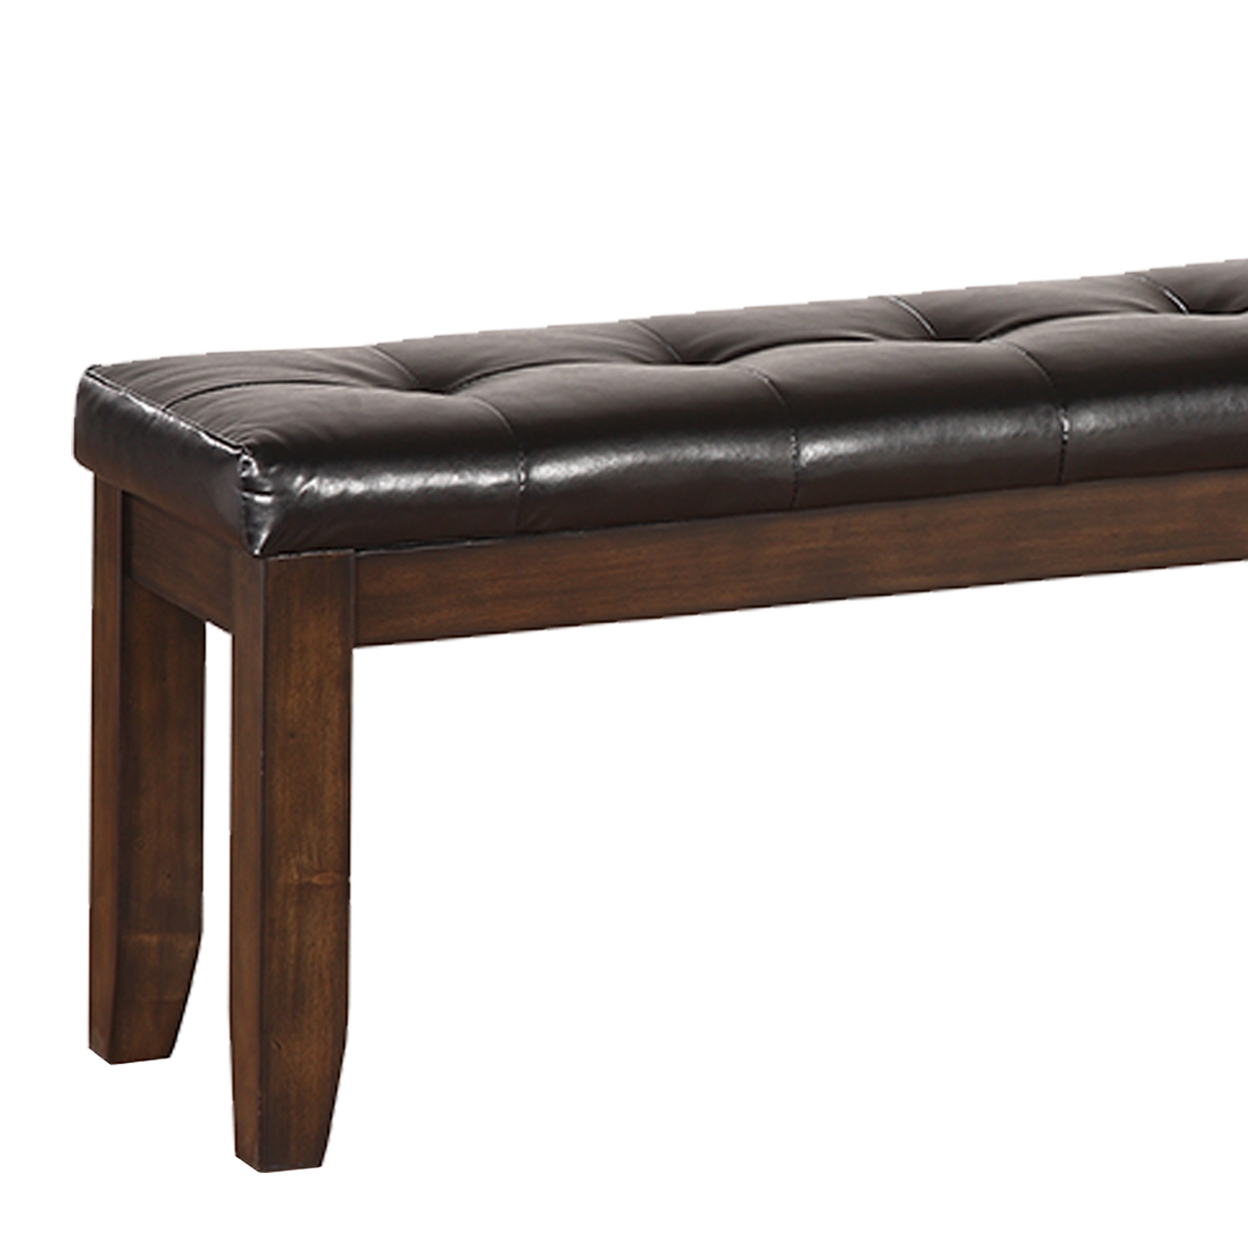 Leatherette Upholstered Tufted Wooden Bench With Chamfered Legs, Brown- Saltoro Sherpi